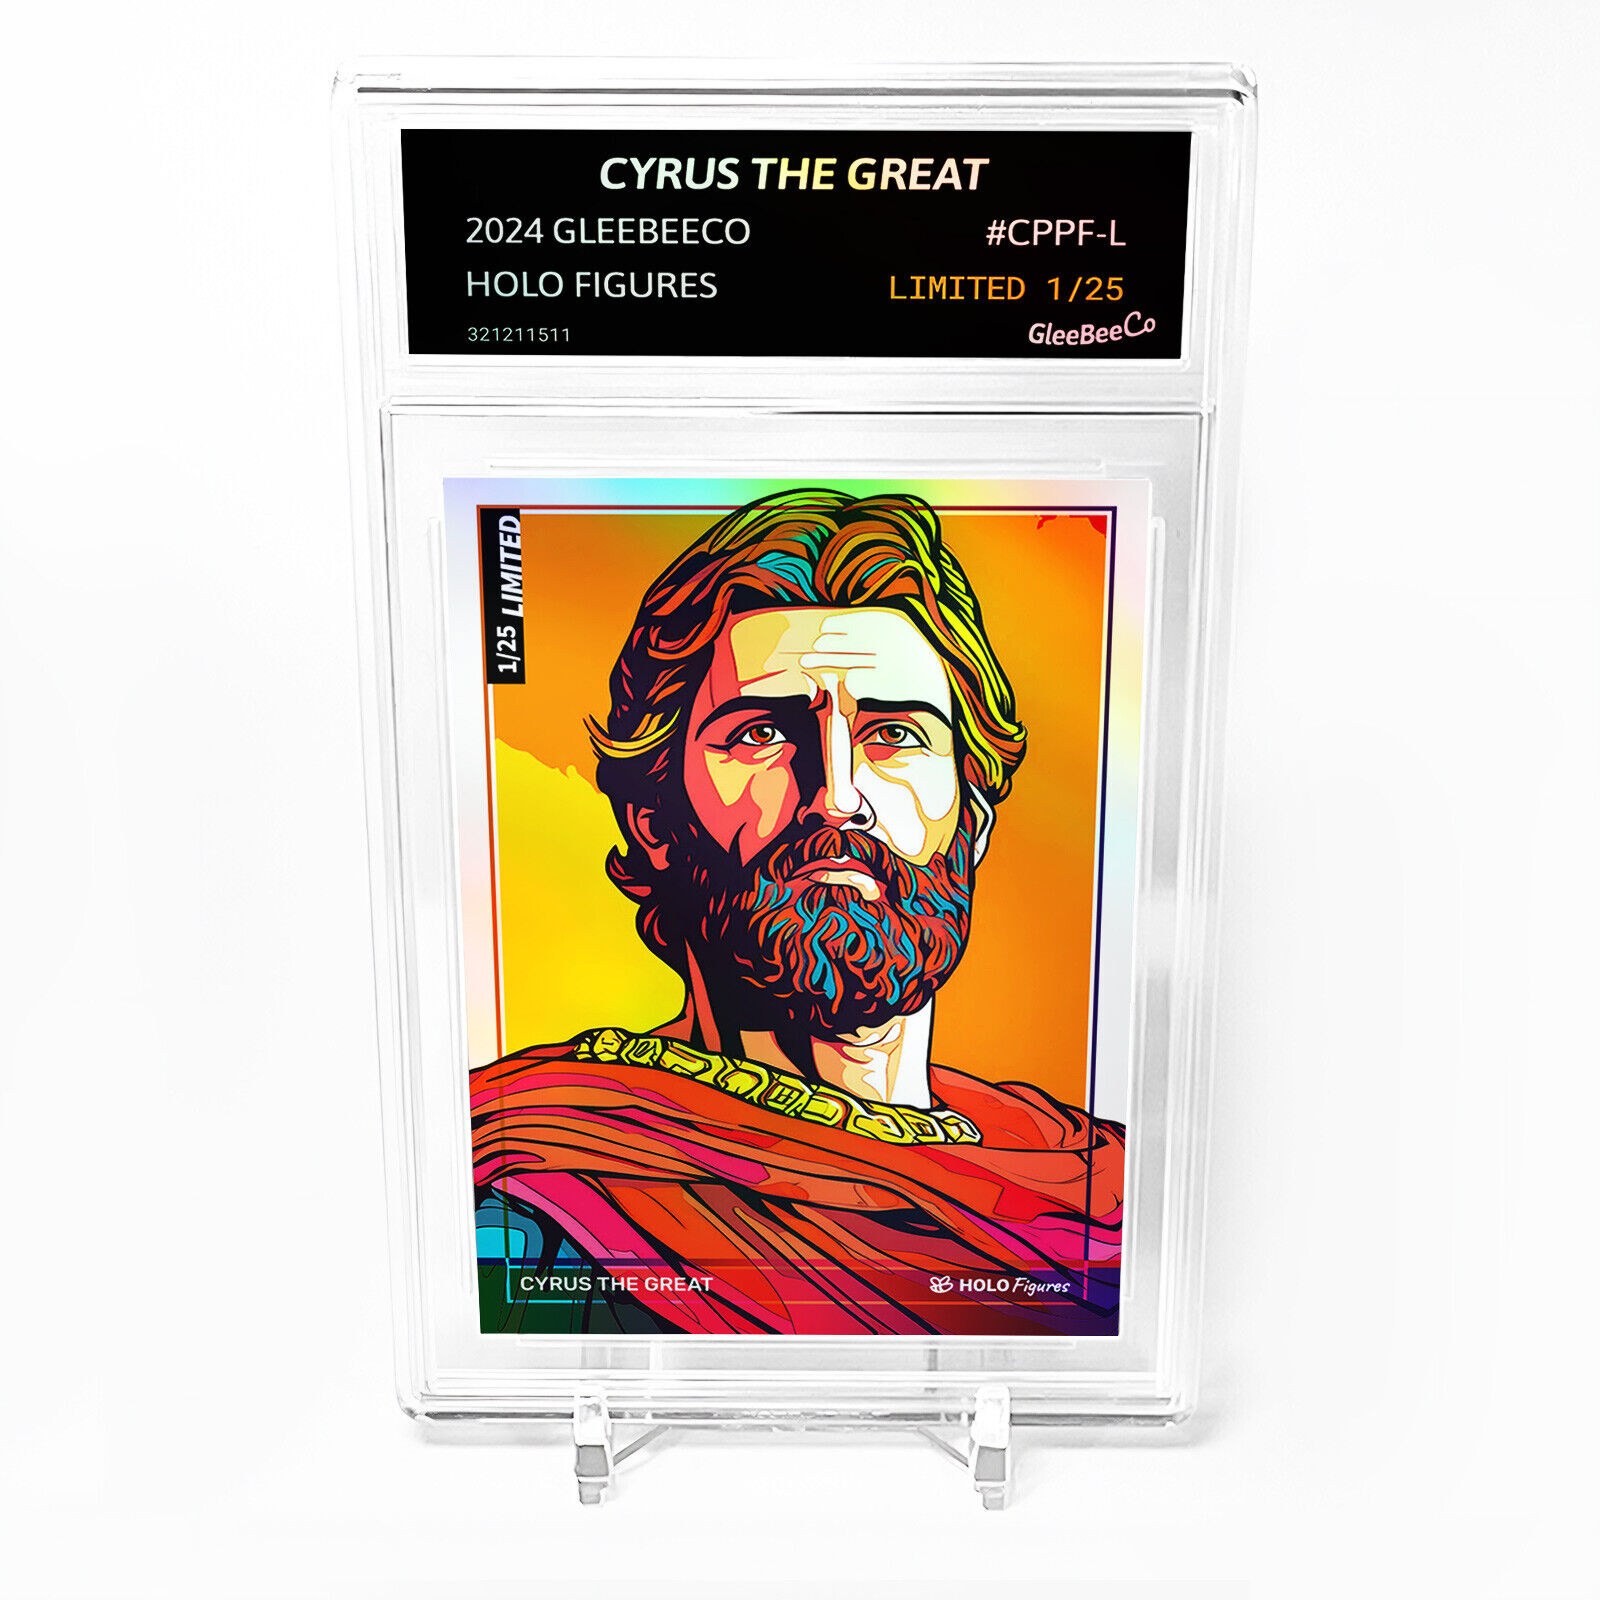 CYRUS THE GREAT Card 2024 GleeBeeCo Holo Figures Pop Art #CPPF-L /25 Made